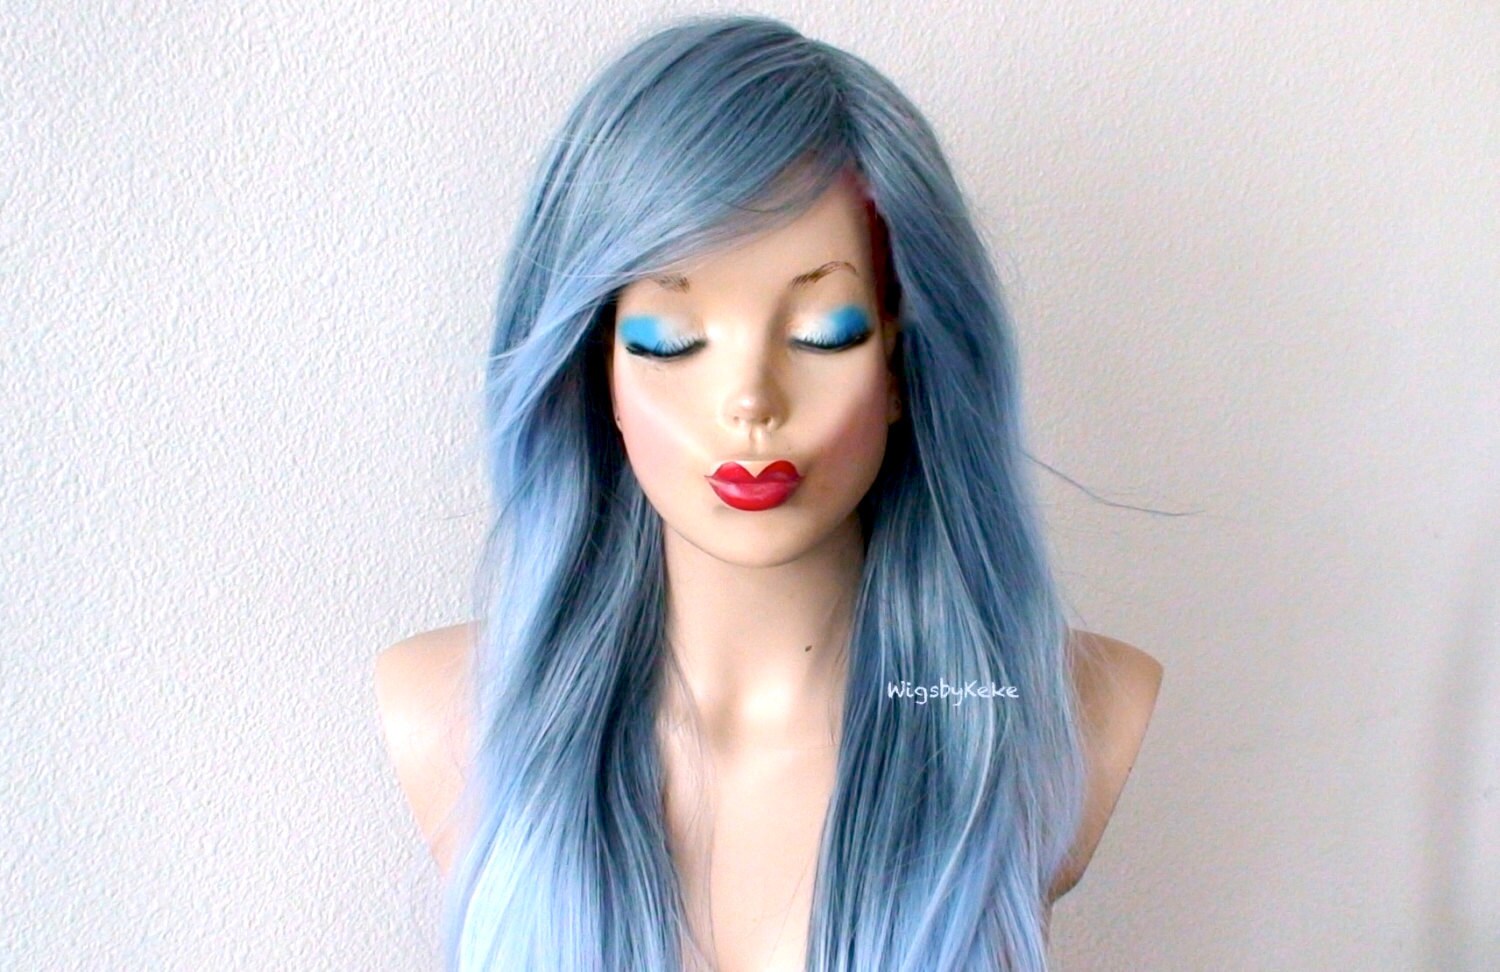 1. "Dark Gray and Blue Hair: 50 Ideas for a Bold and Beautiful Look" - wide 1